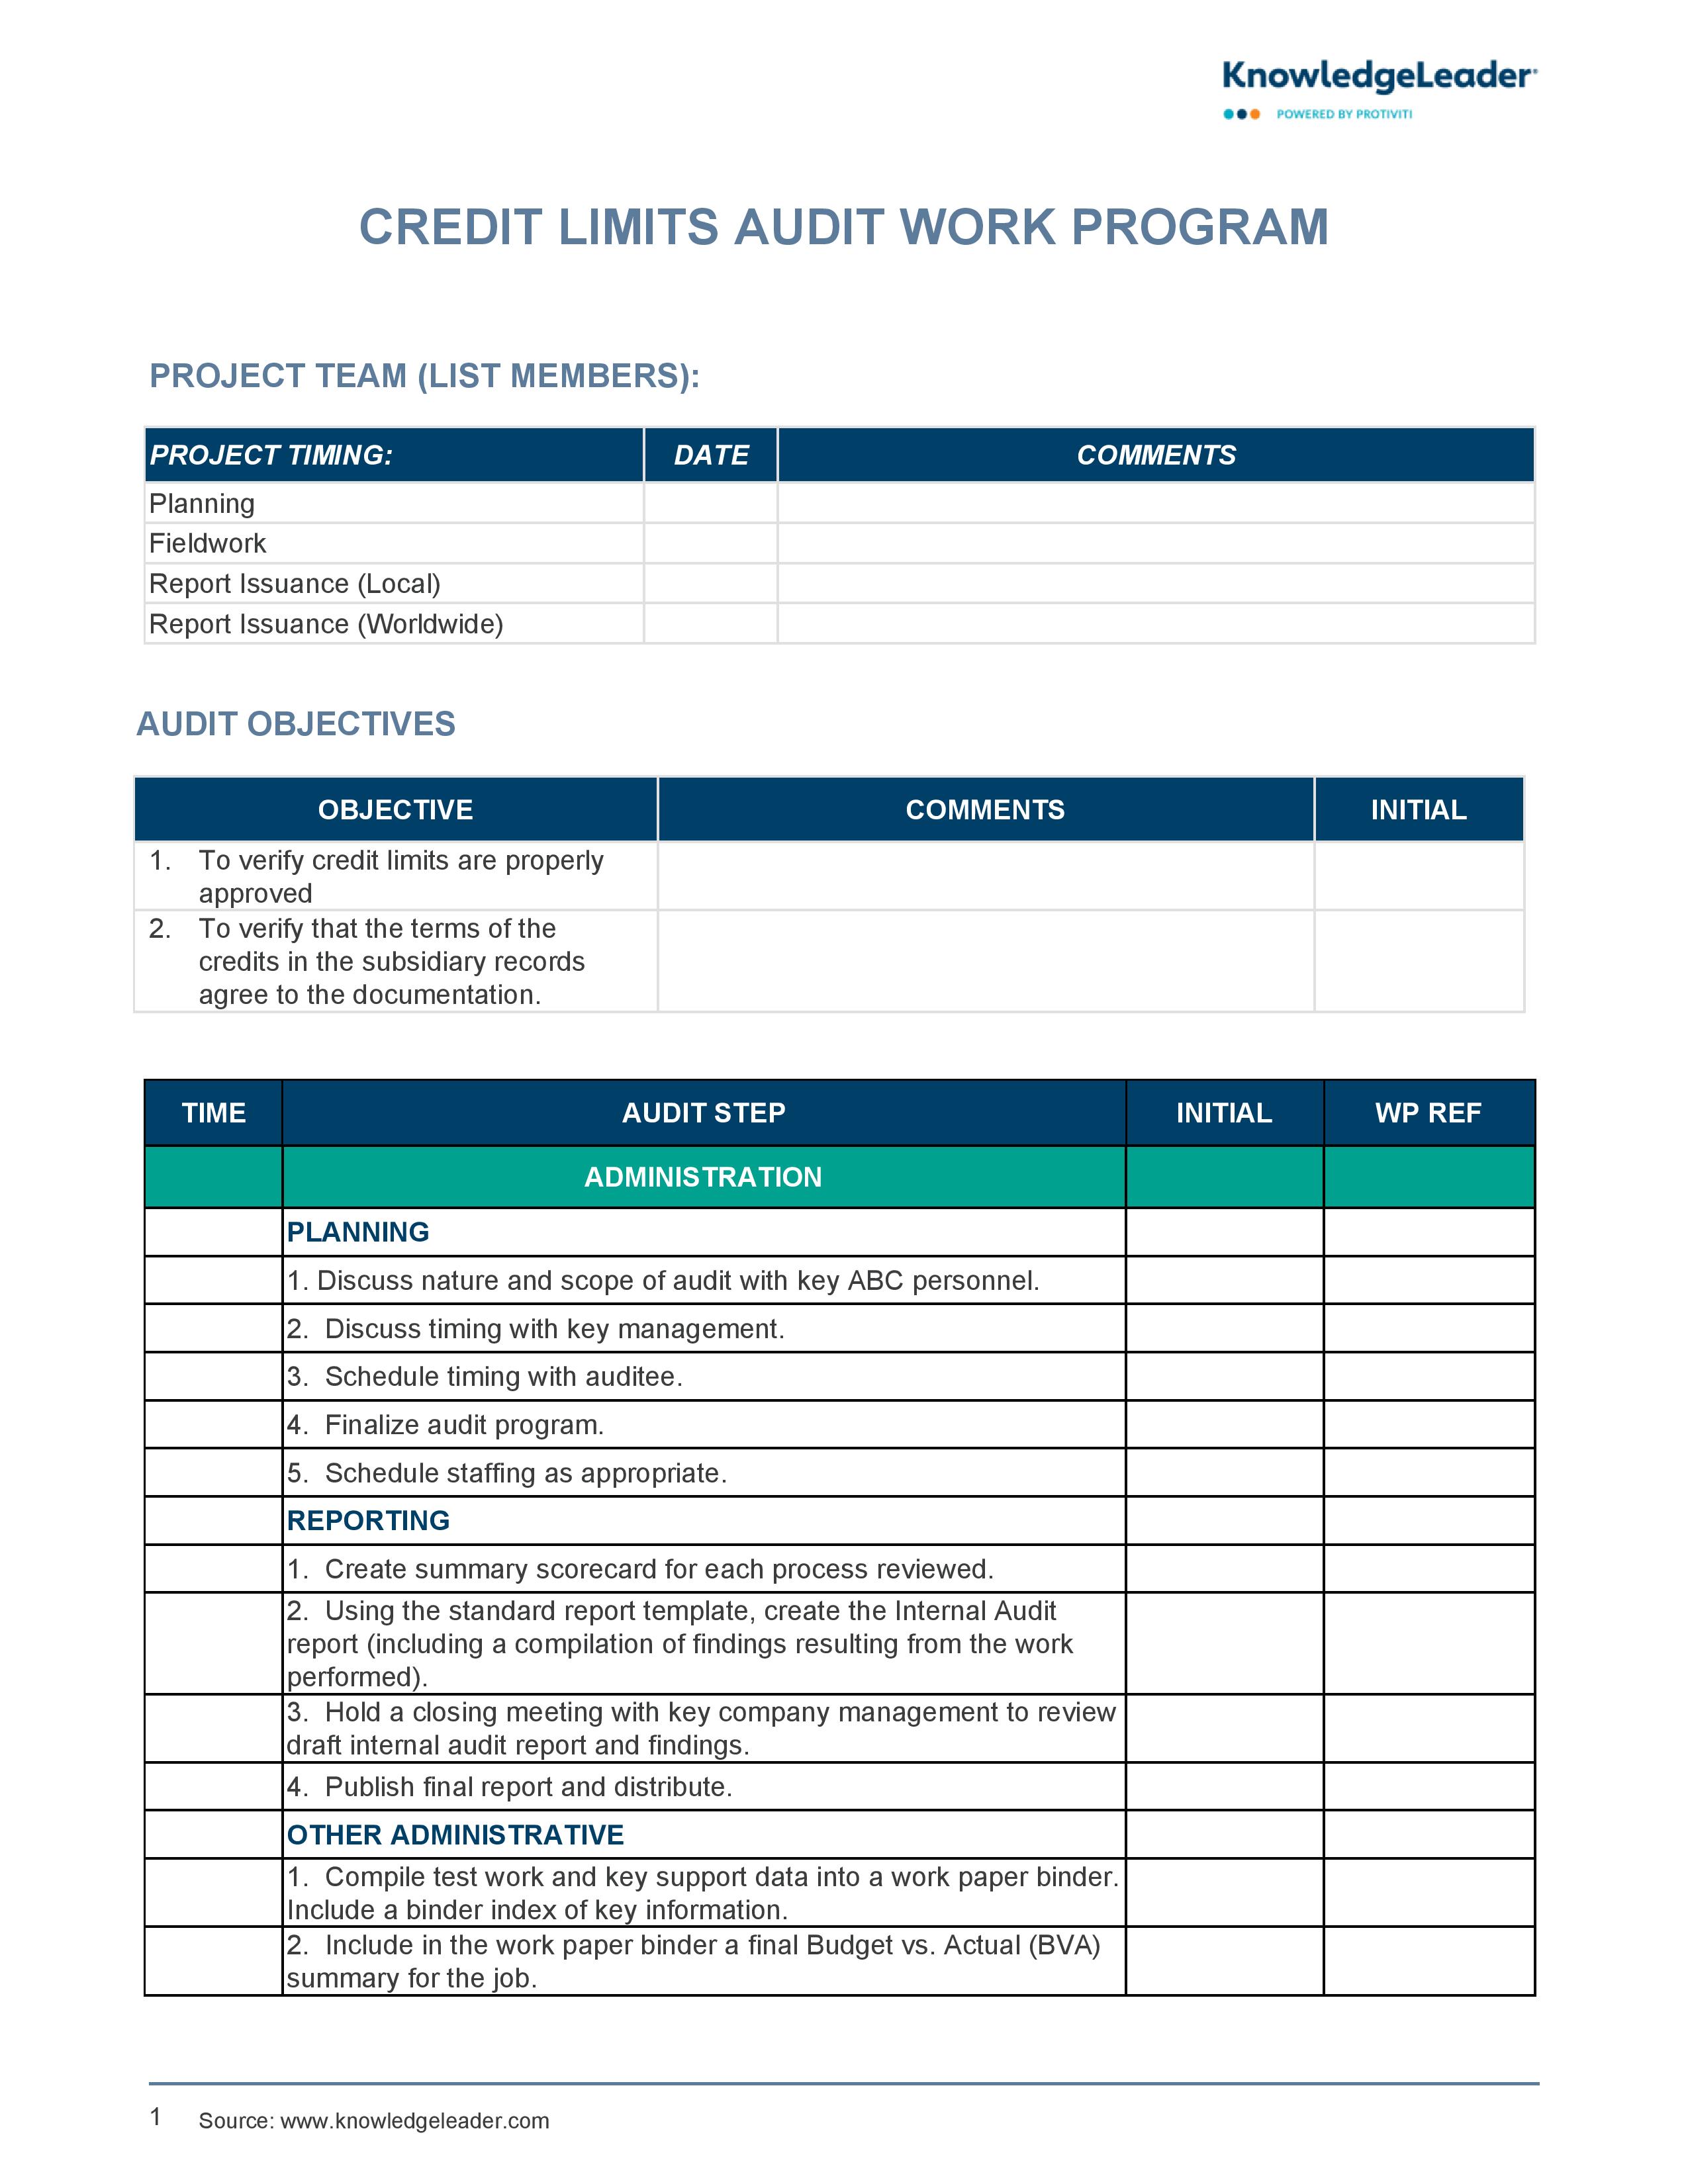 screenshot of the first page of Credit Limits Audit Work Program